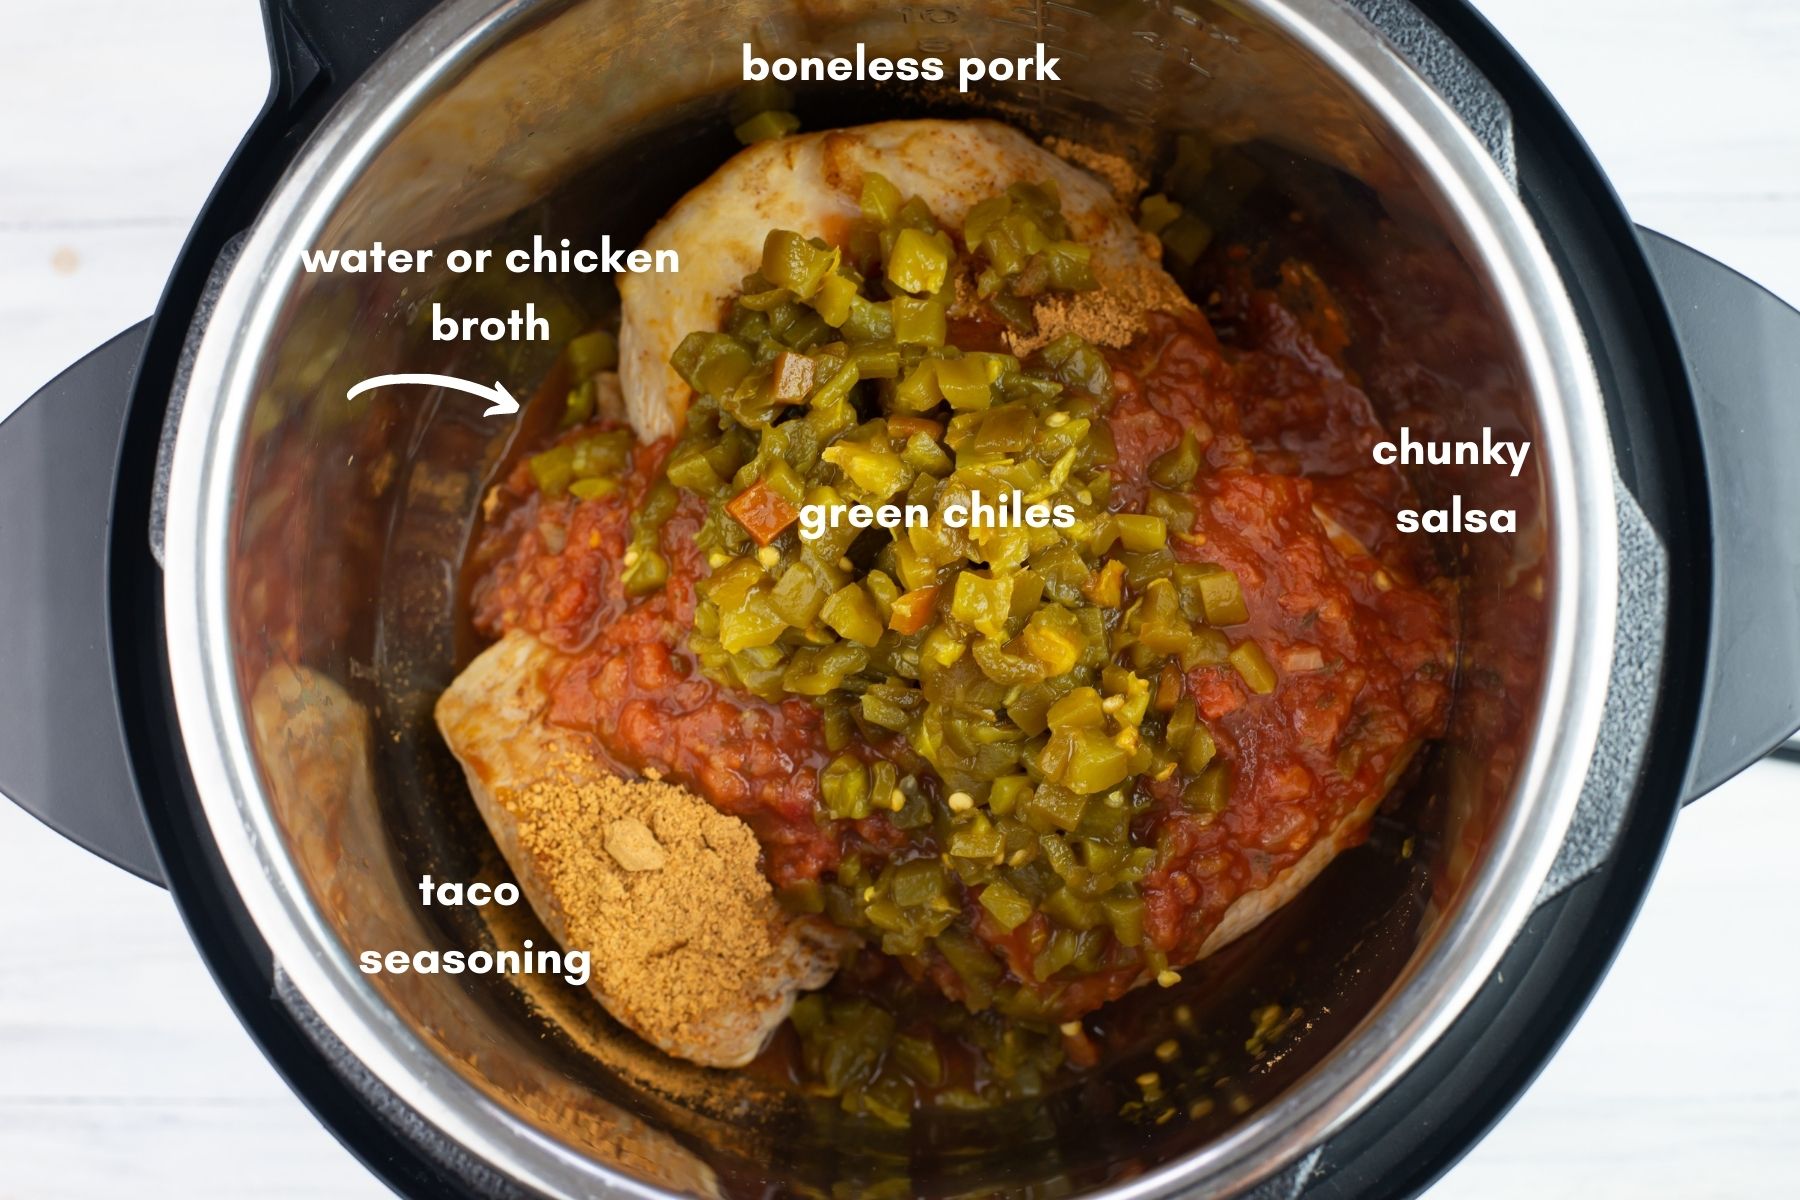 Spicy Shredded Pork Ingredients inside the Instant Pot before pressure cooking